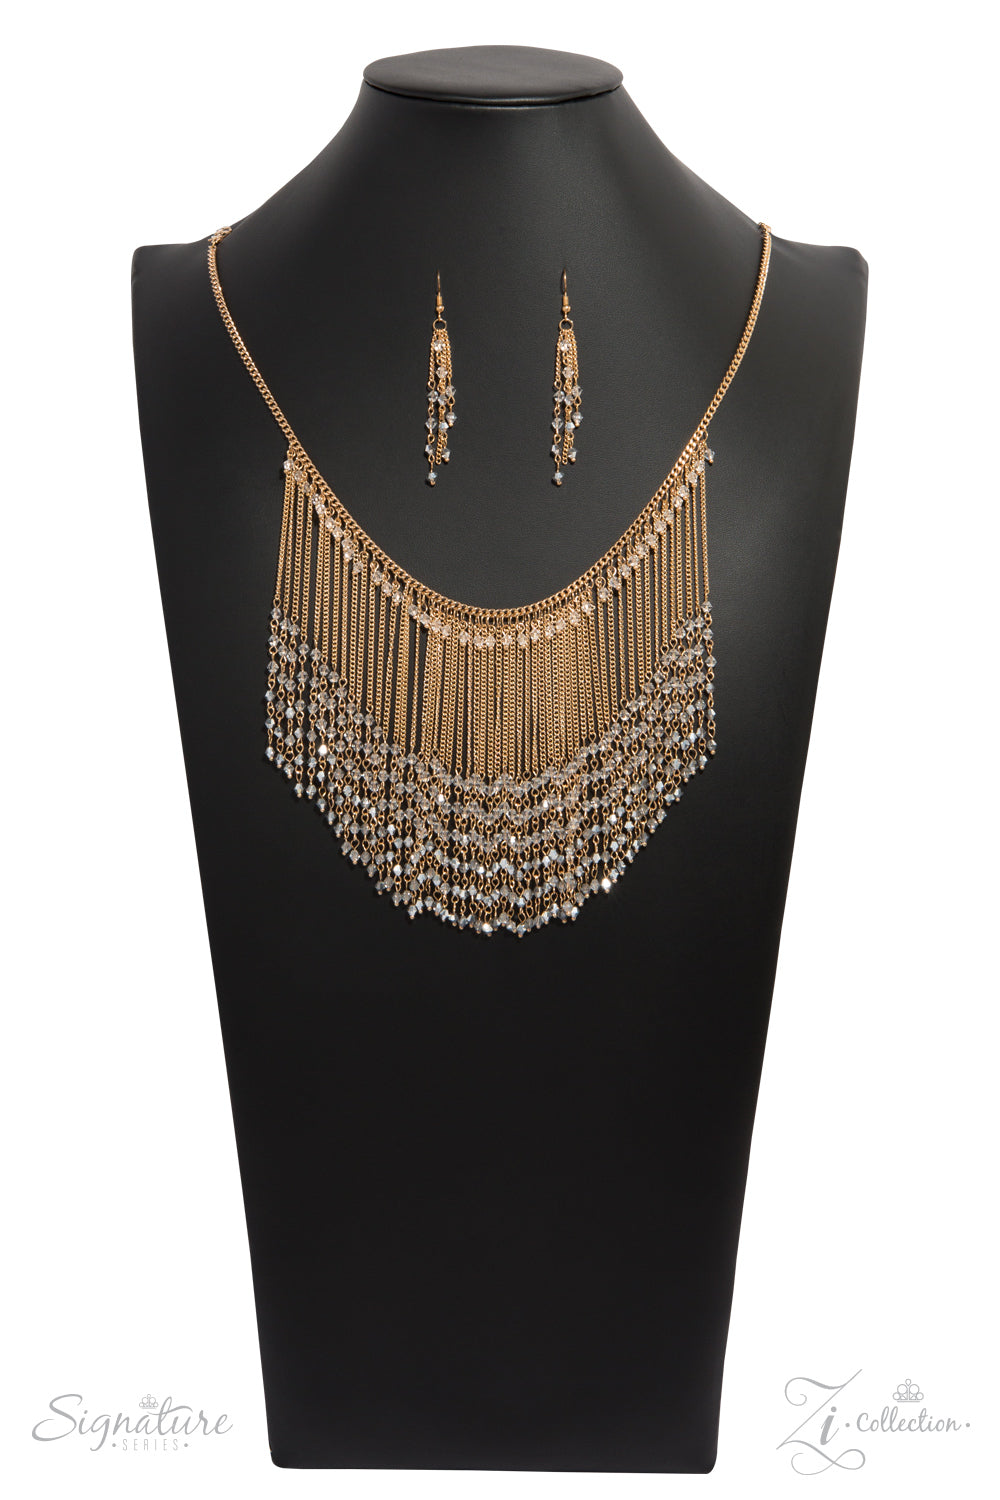 The DonnaLee-Zi Collection Necklace